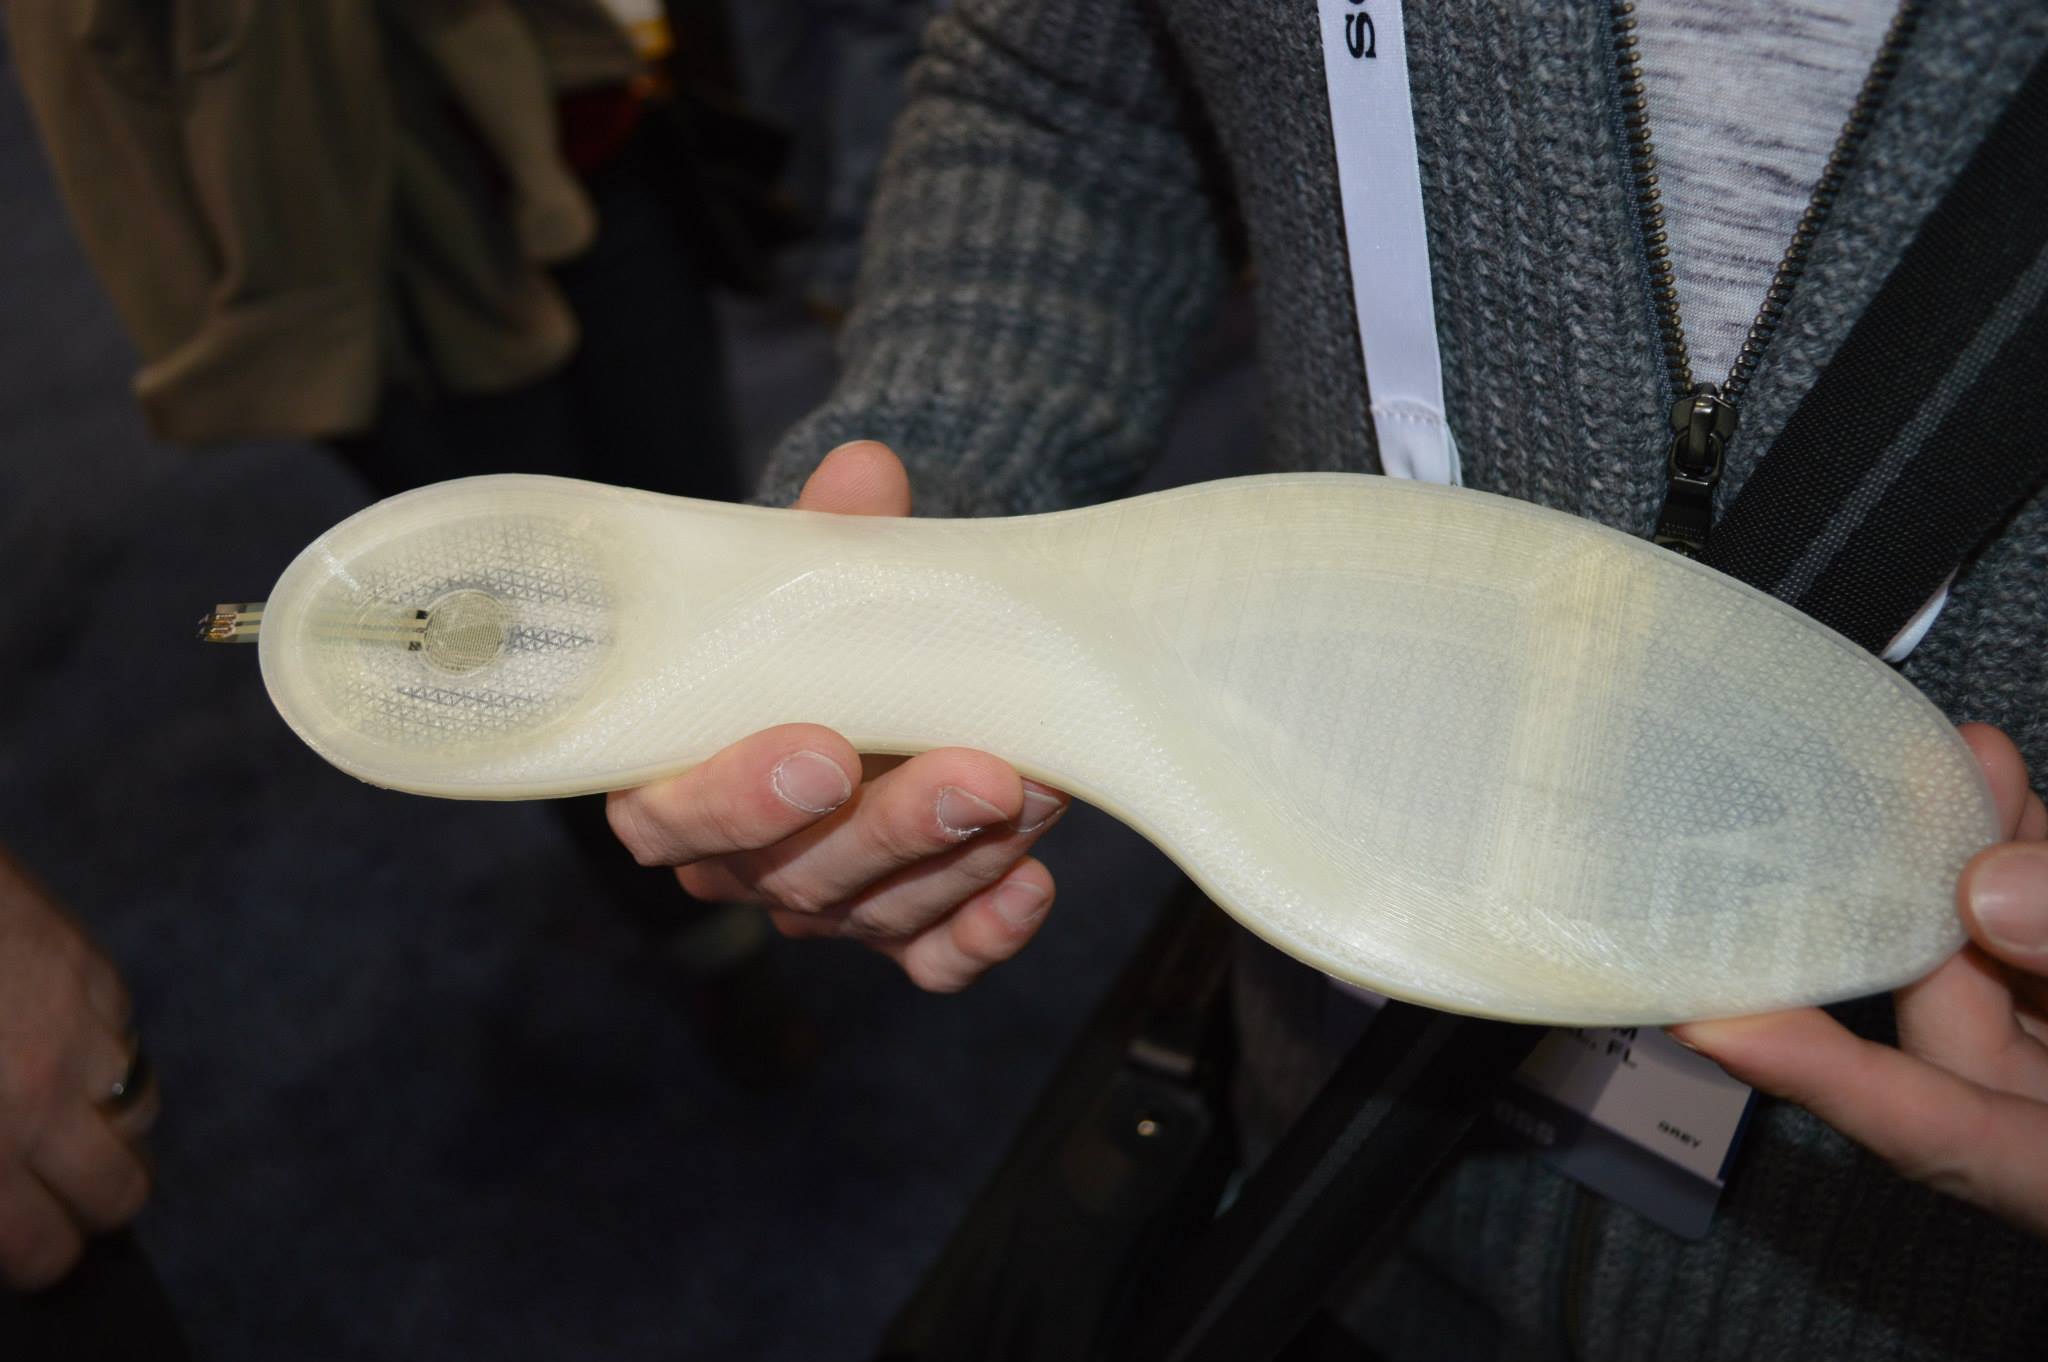 A shoe sole 3D printed with an embedded pressure sensor.